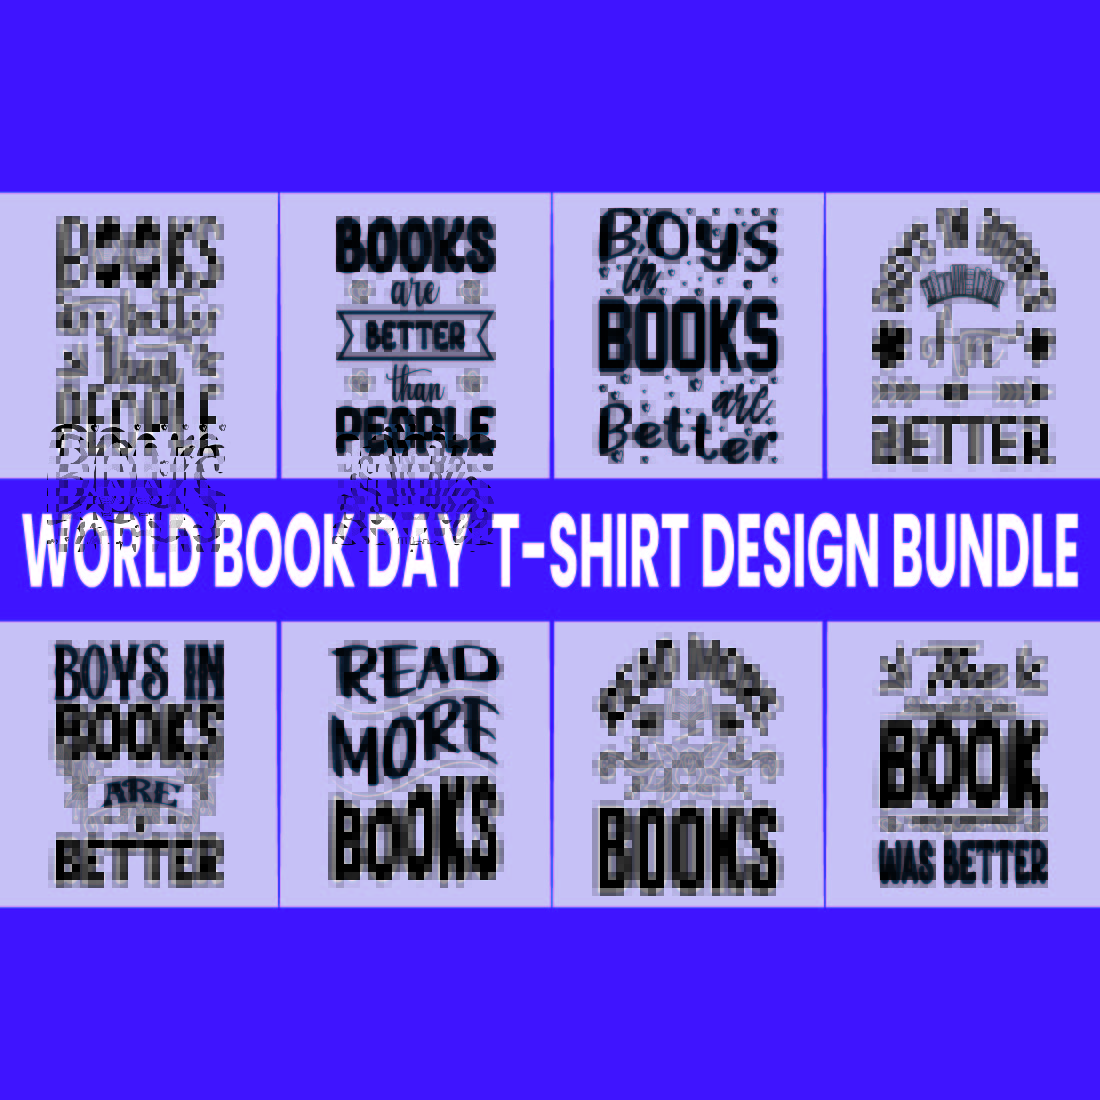 World Book Day T-shirt Design Bundle cover image.